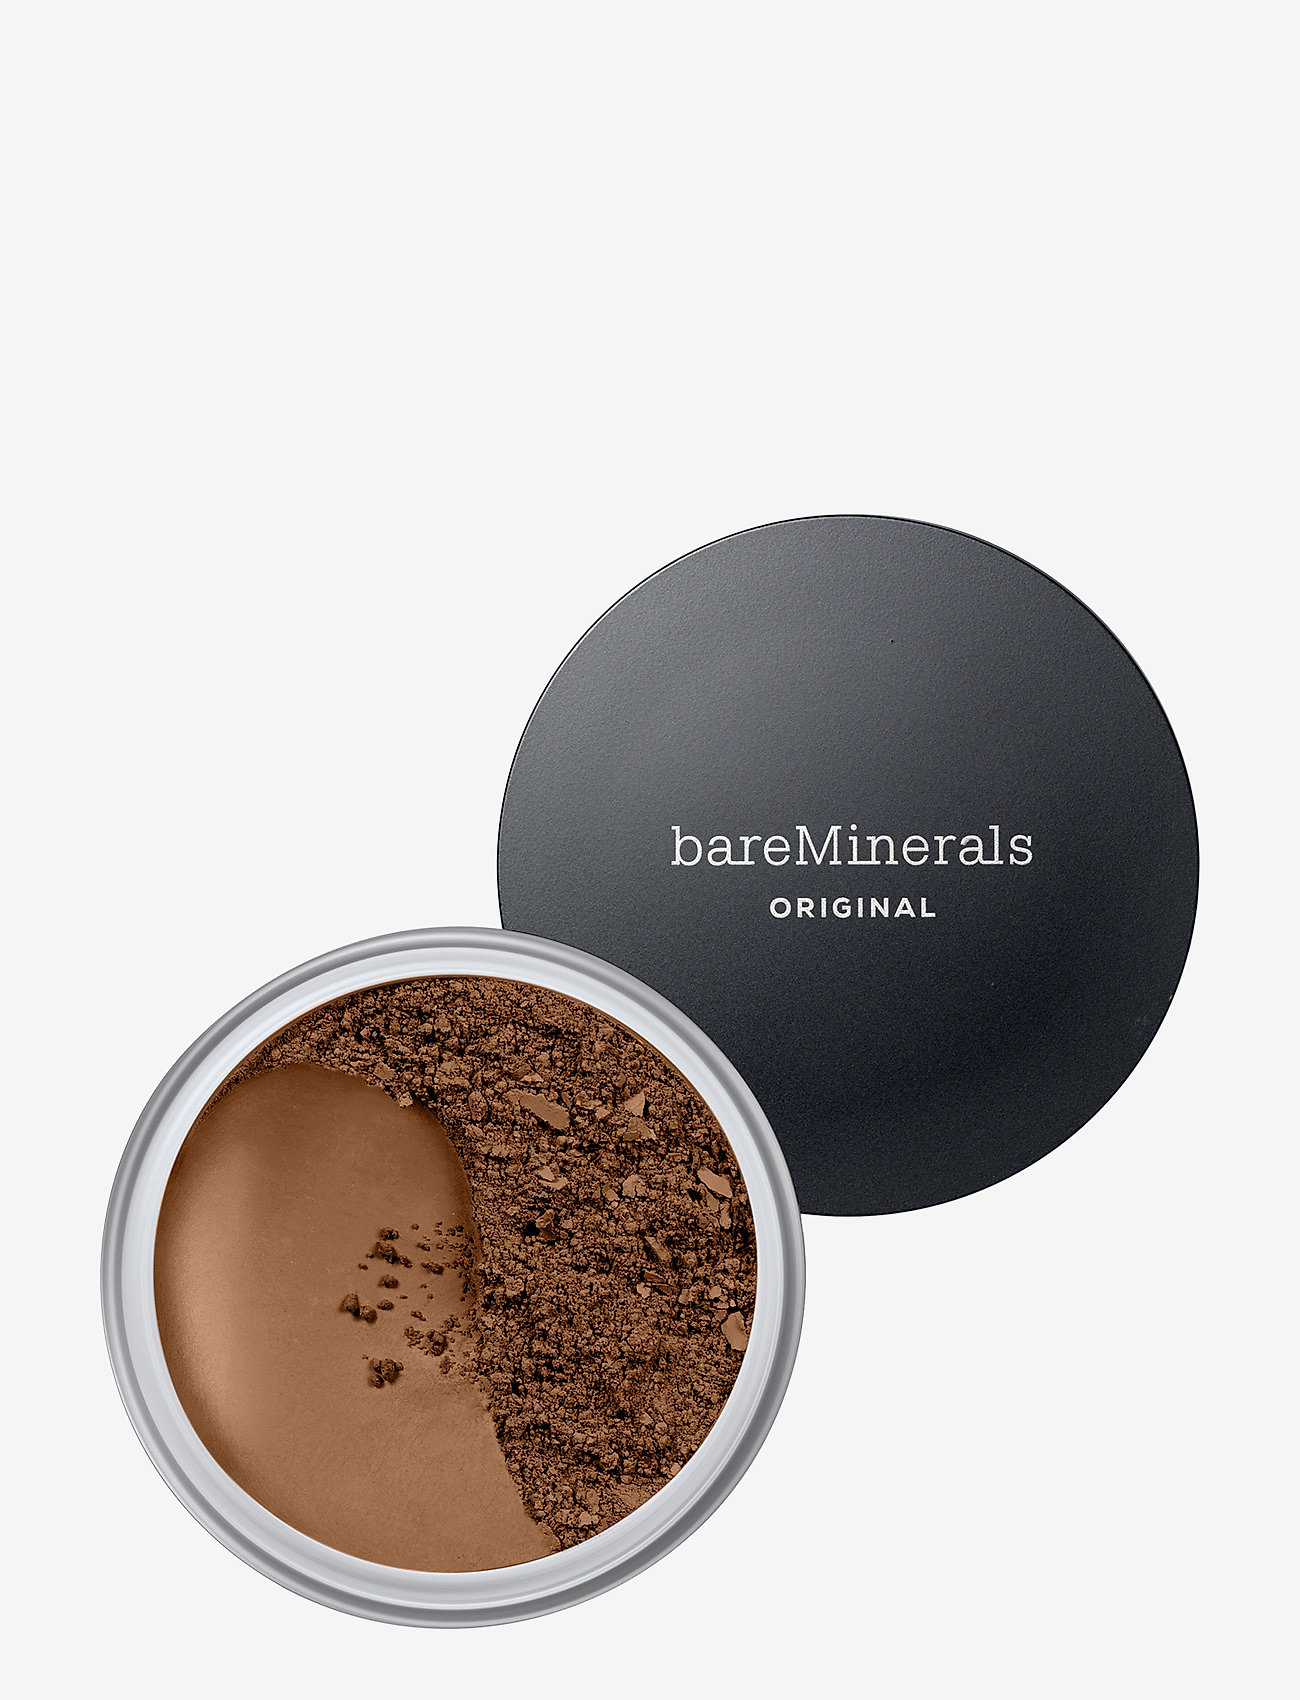 bareMinerals - Original Loose Foundation Neutral deep 29 - party wear at outlet prices - neutral deep 29 - 0